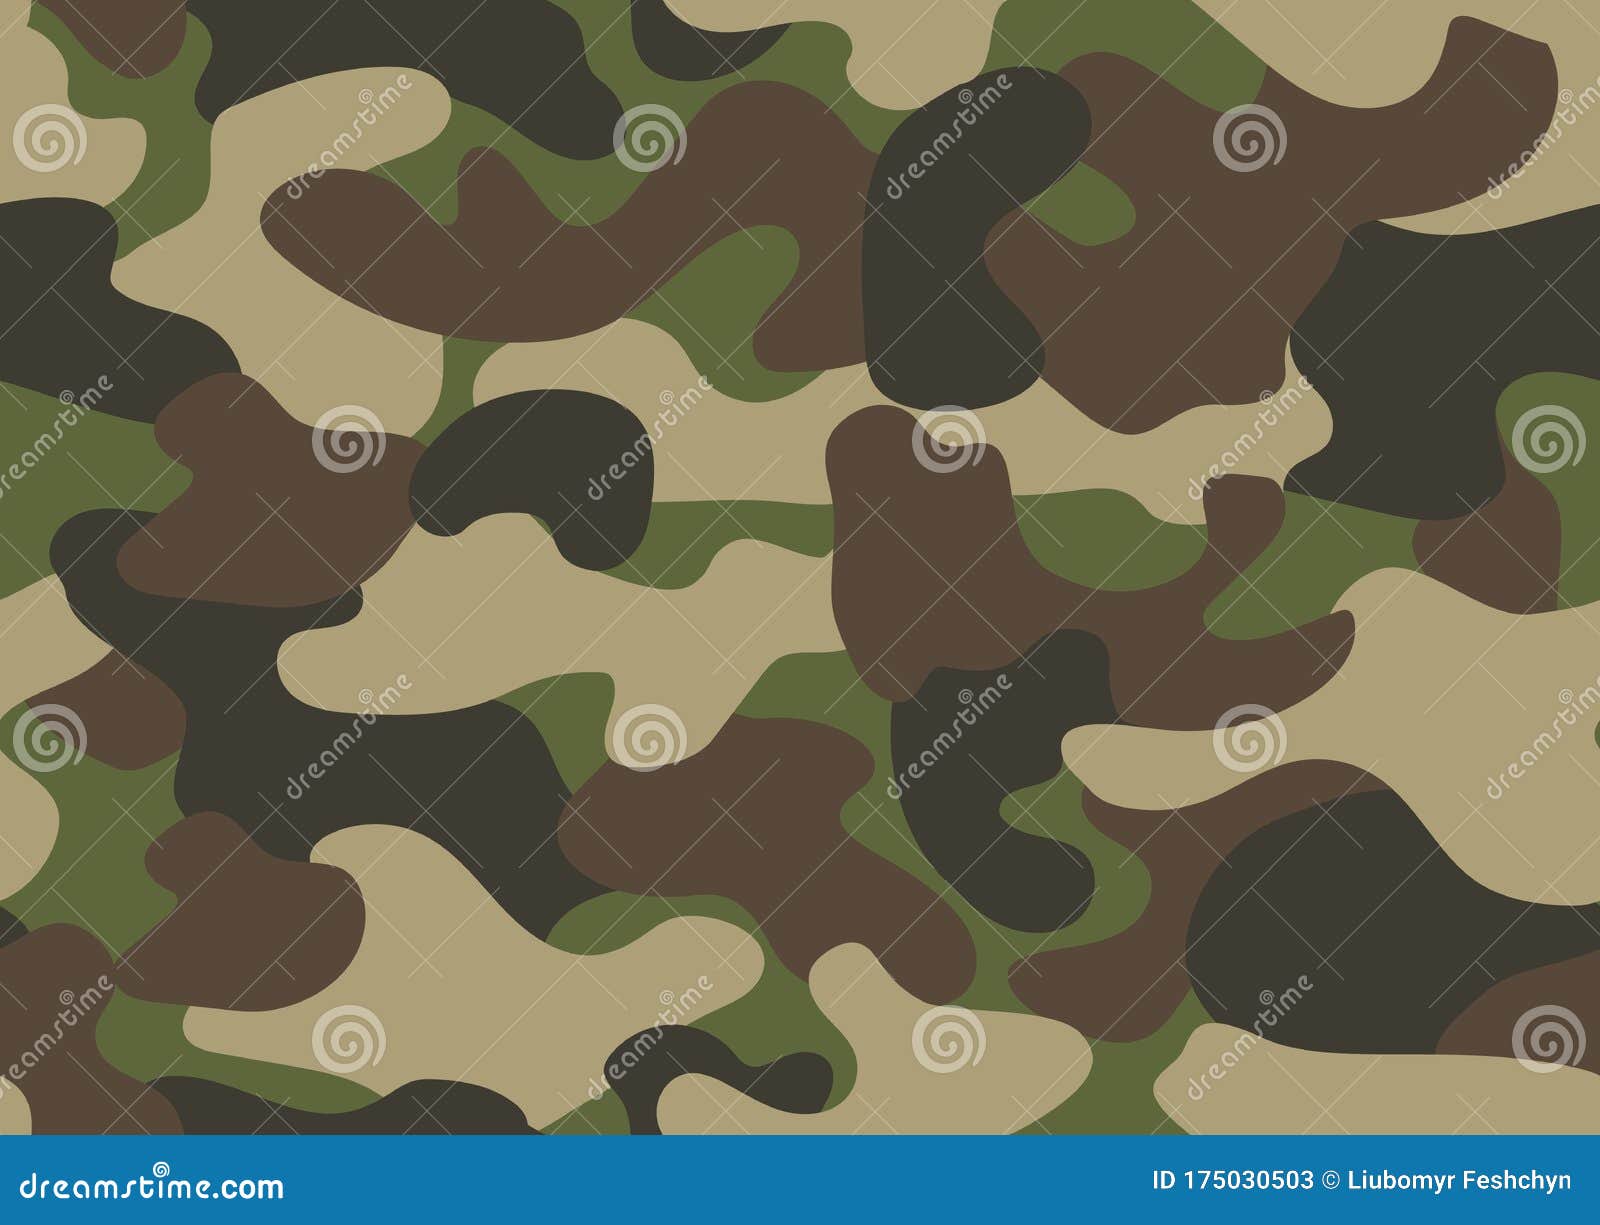 camouflage seamless pattern. abstract military or hunting camouflage background. classic clothing style masking camo